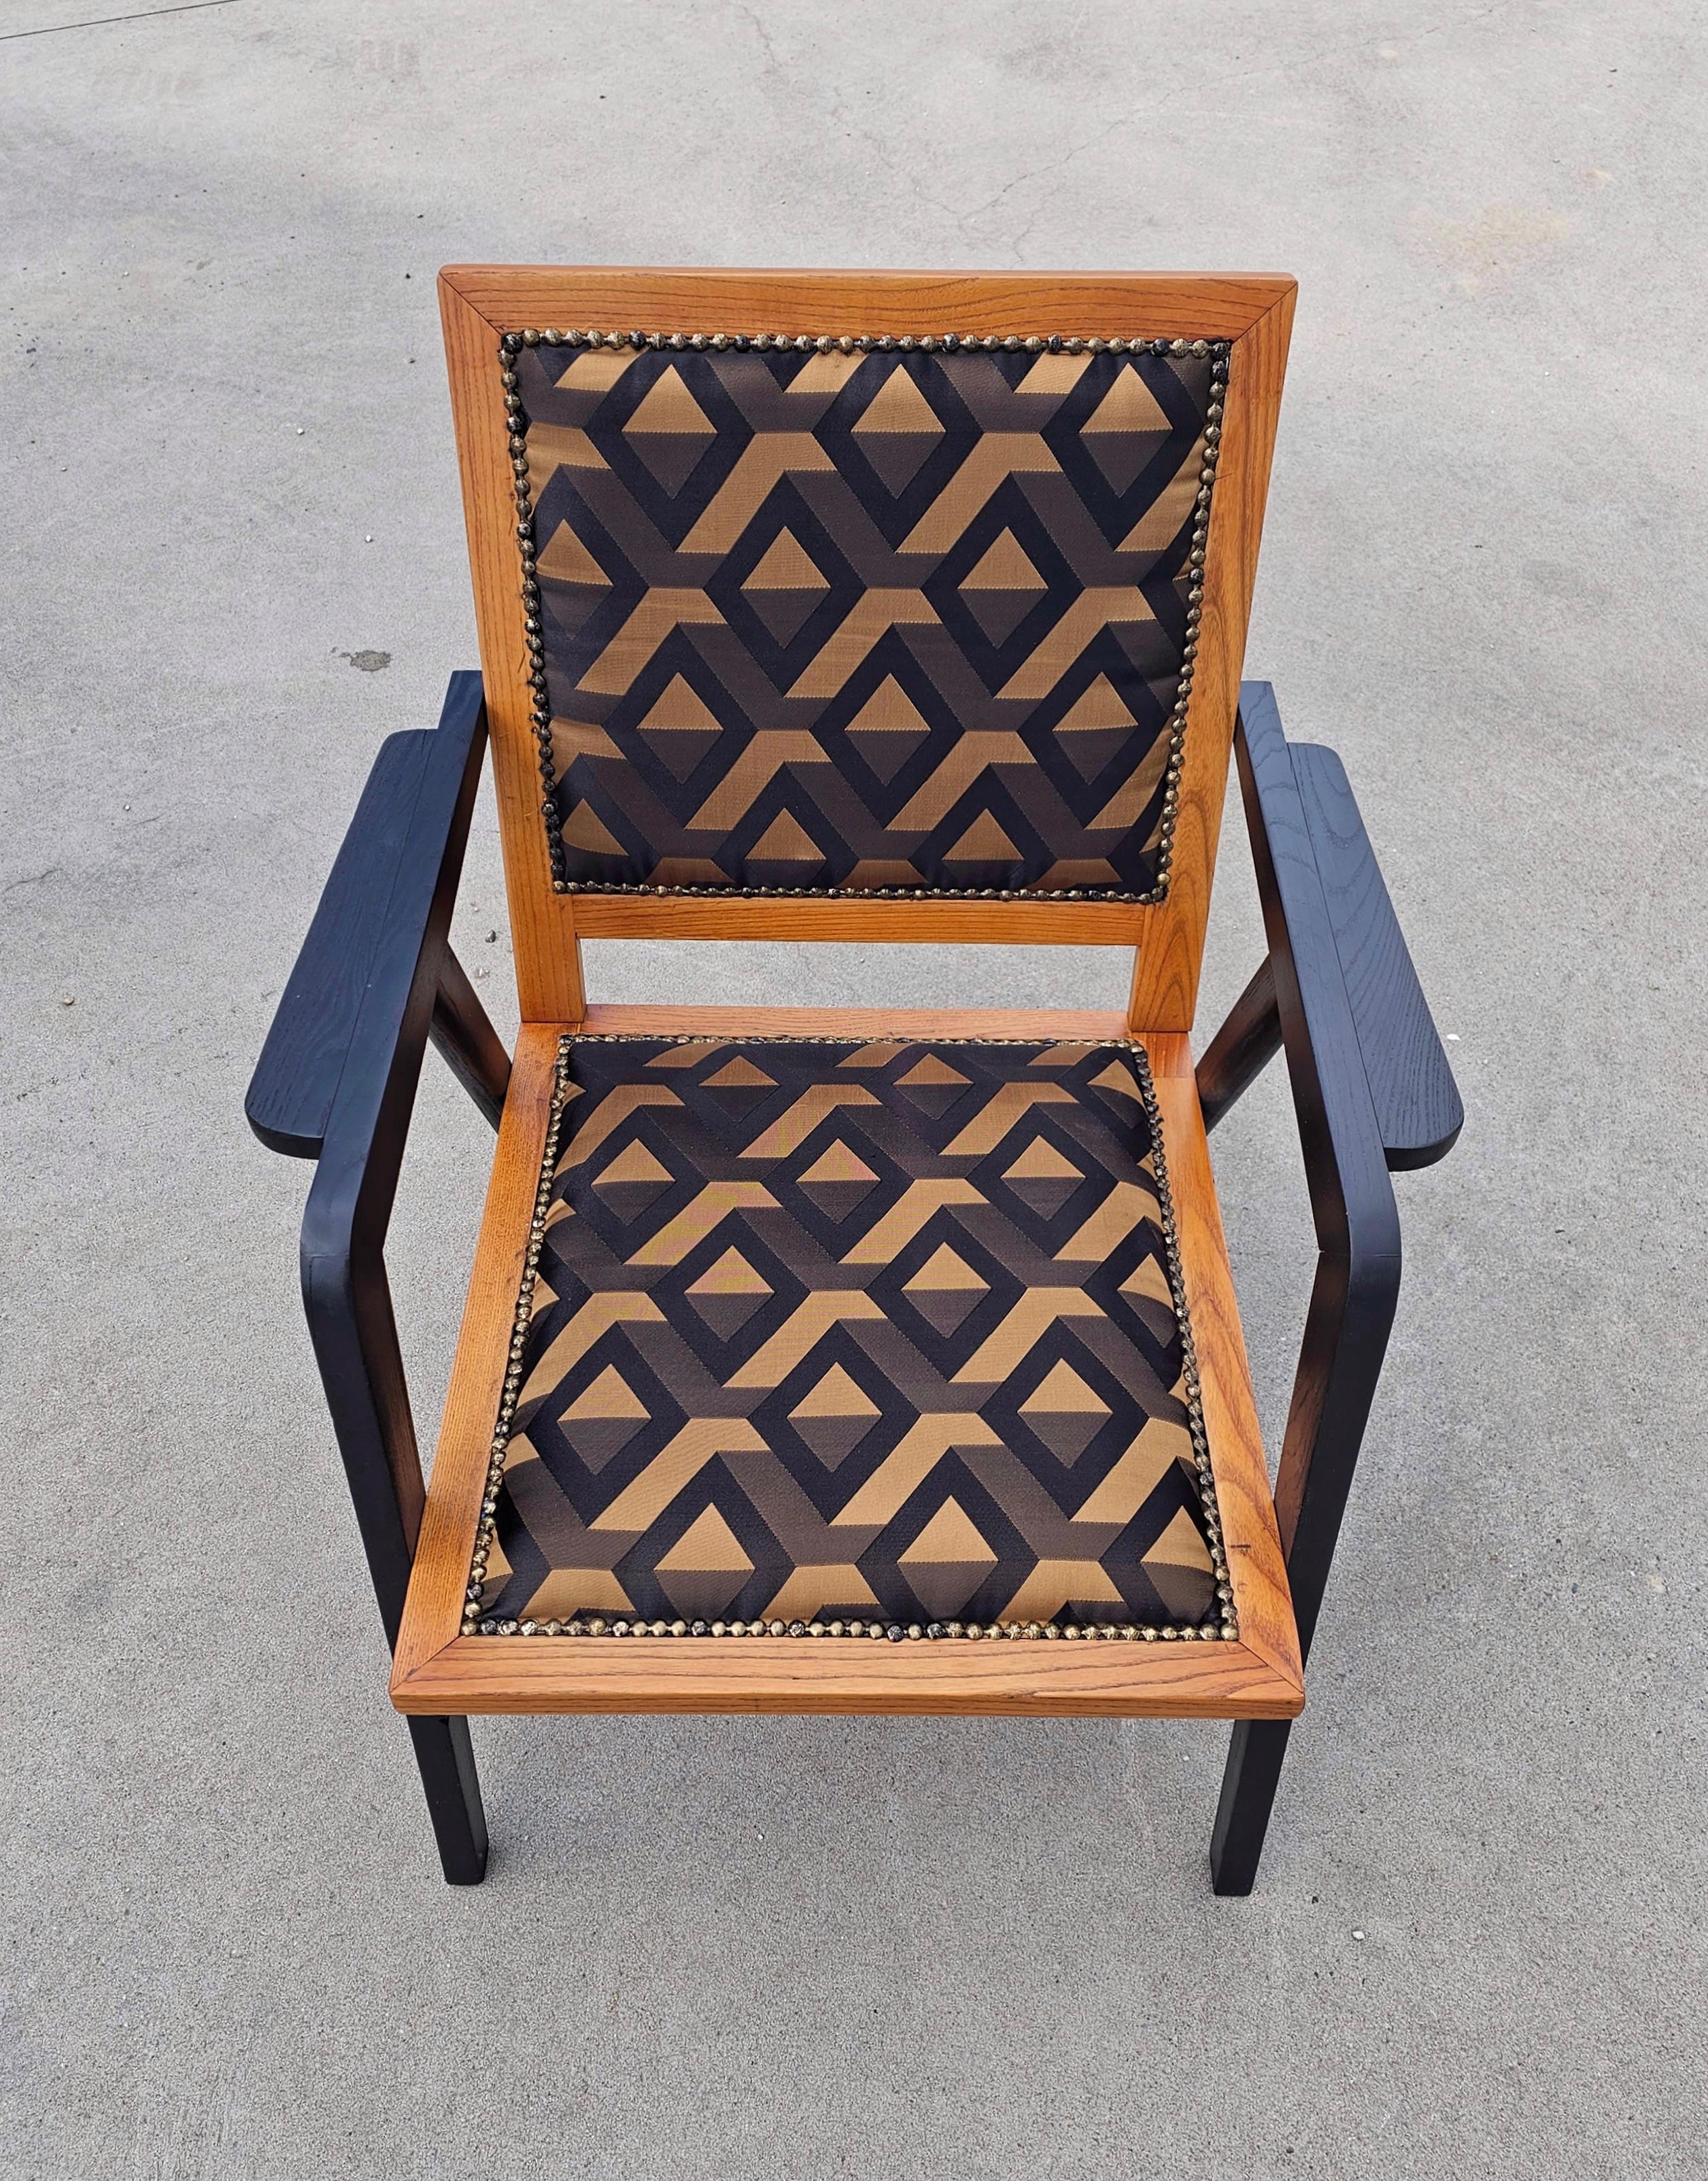 In this listing you will find a pair of very rare, fully refurbished Mid-Century Modern Armchair done in Ebonized Oak Wood and Jacquard Fabric with Art Deco Inspired Print in black, gold and anthracite. The armchairs feature unique shape of the legs